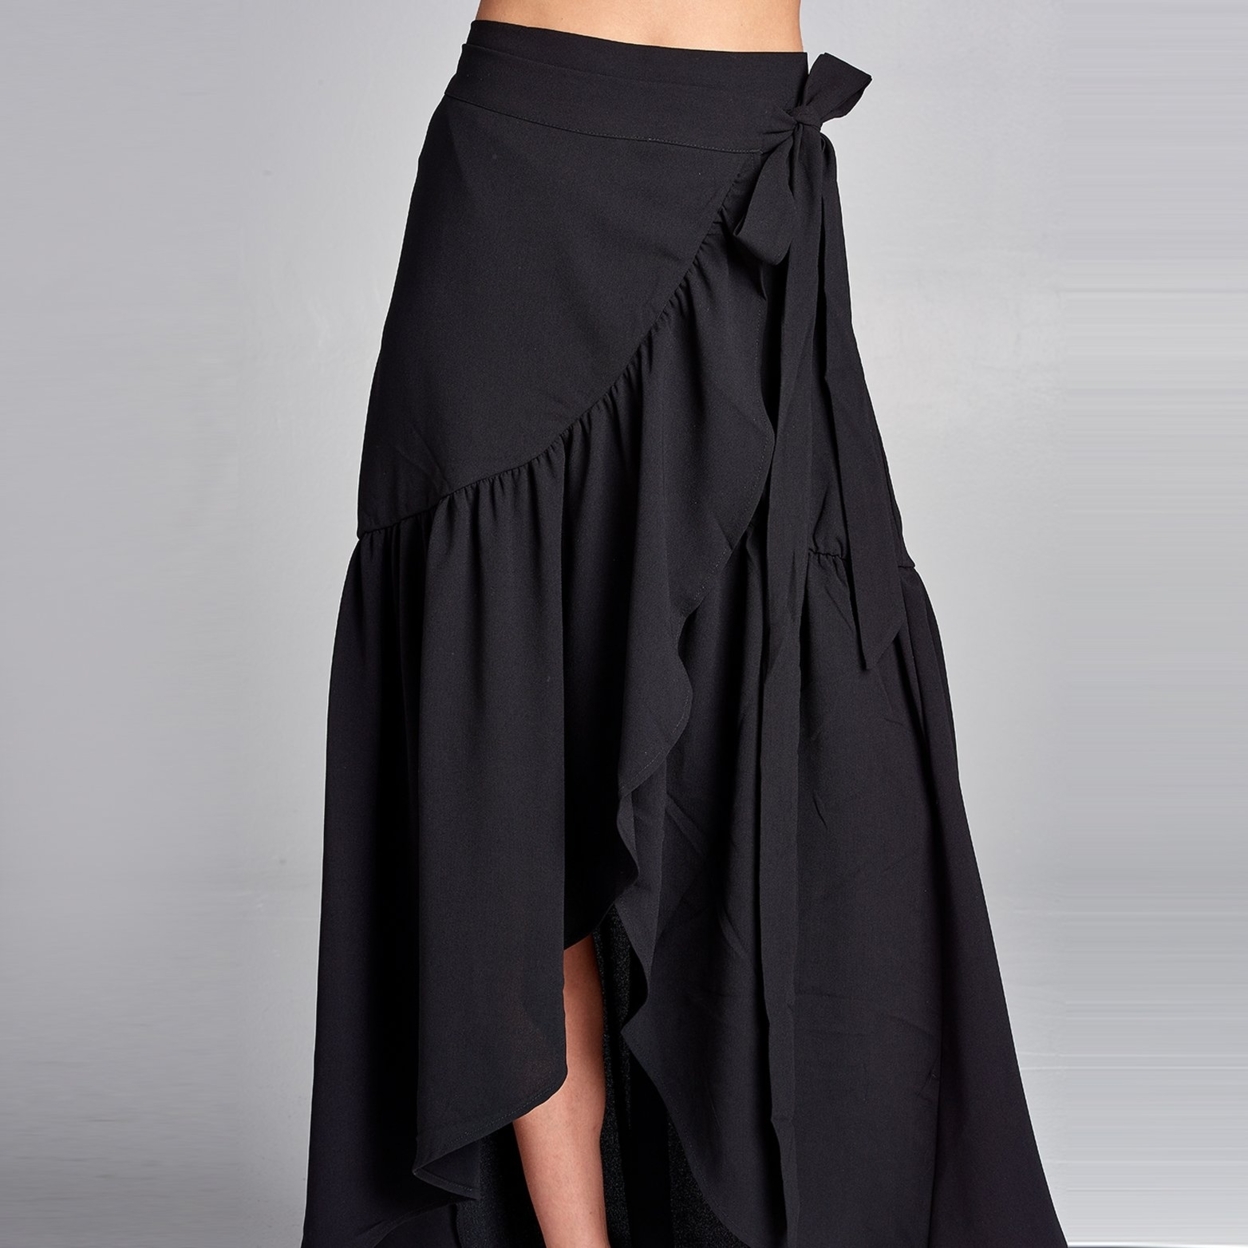 Frilled Wrap Skirt - Black, Small (2-6)